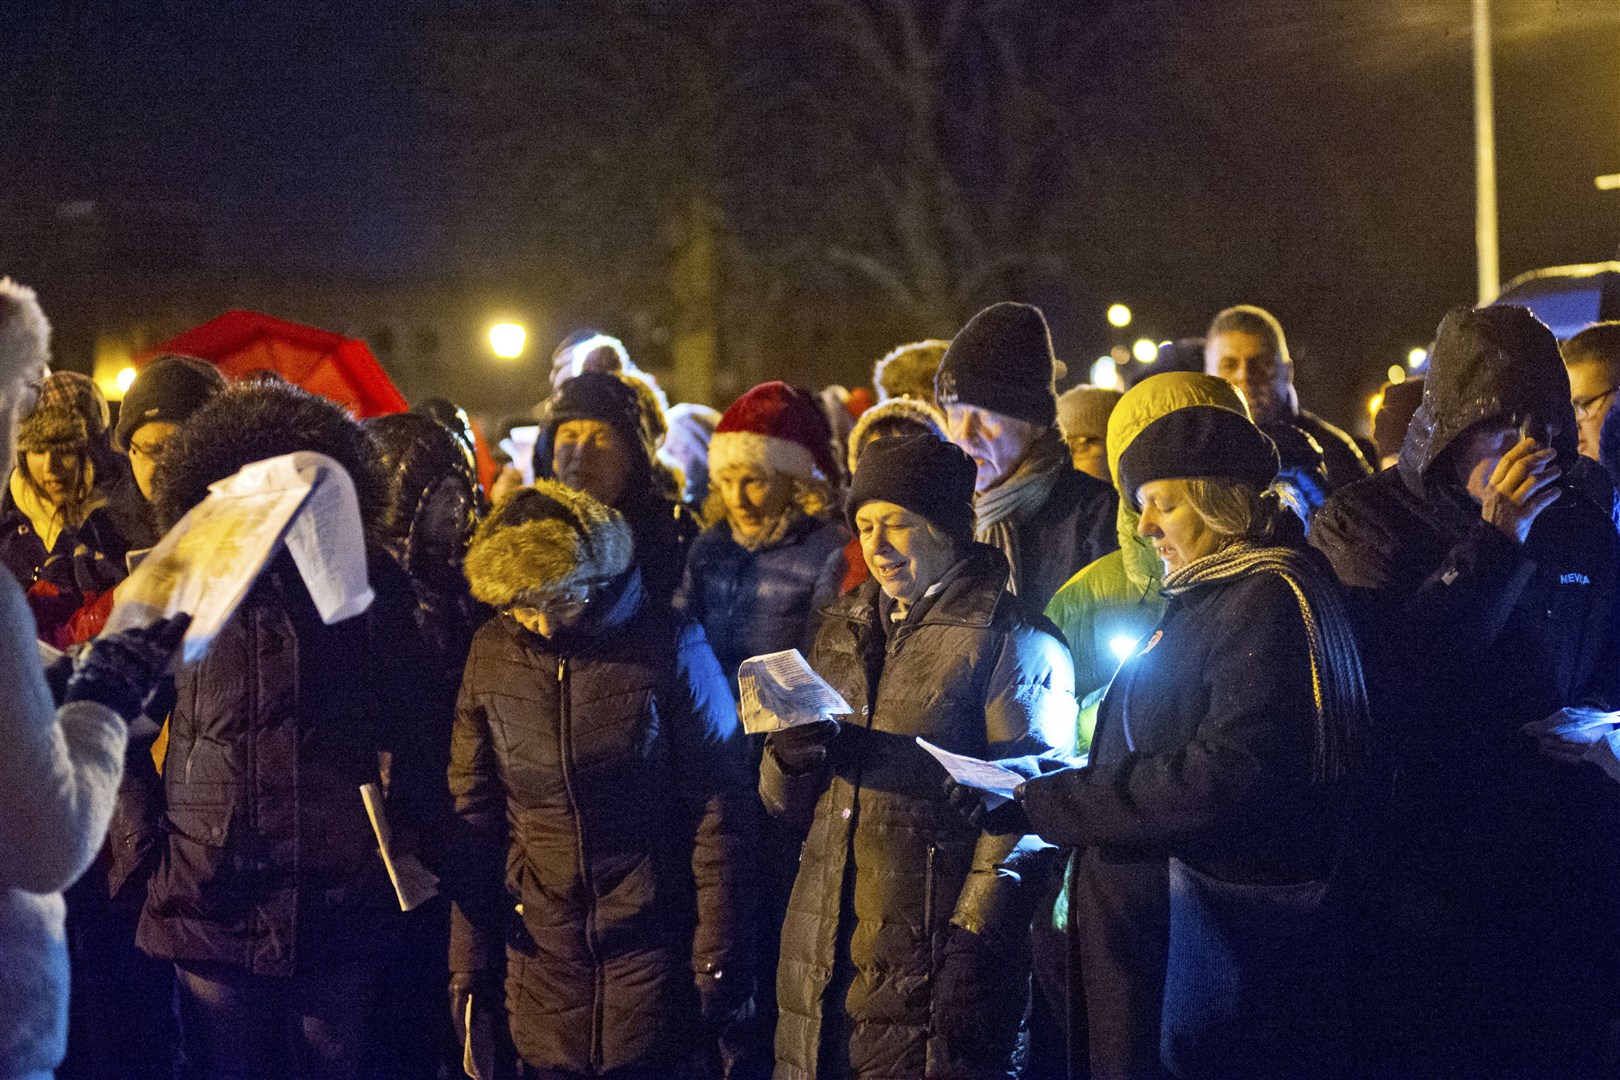 Crowds gather to enjoy Carols at Cooper Park by Moray Concert Brass.